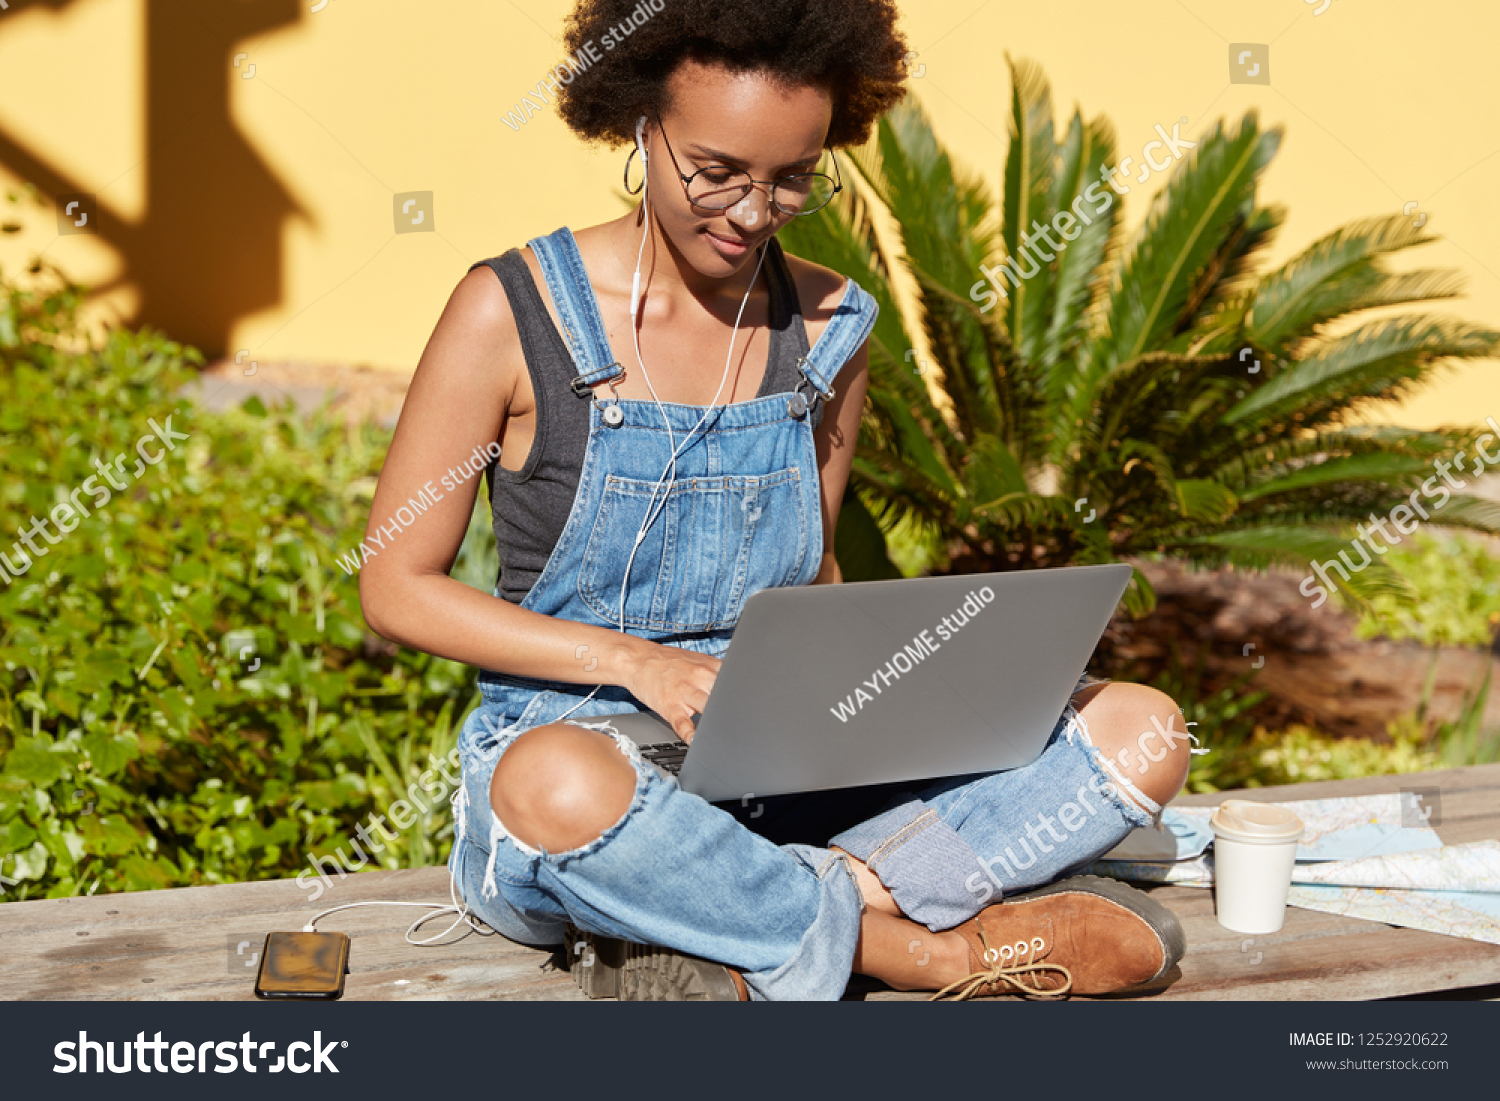 Photo of attractive woman with Afro haircut, sits crossed legs with portable laptop computer, keyboards new publication for her blog, listens music, uses mobile phone, earphones, wears stylish clothes #1252920622